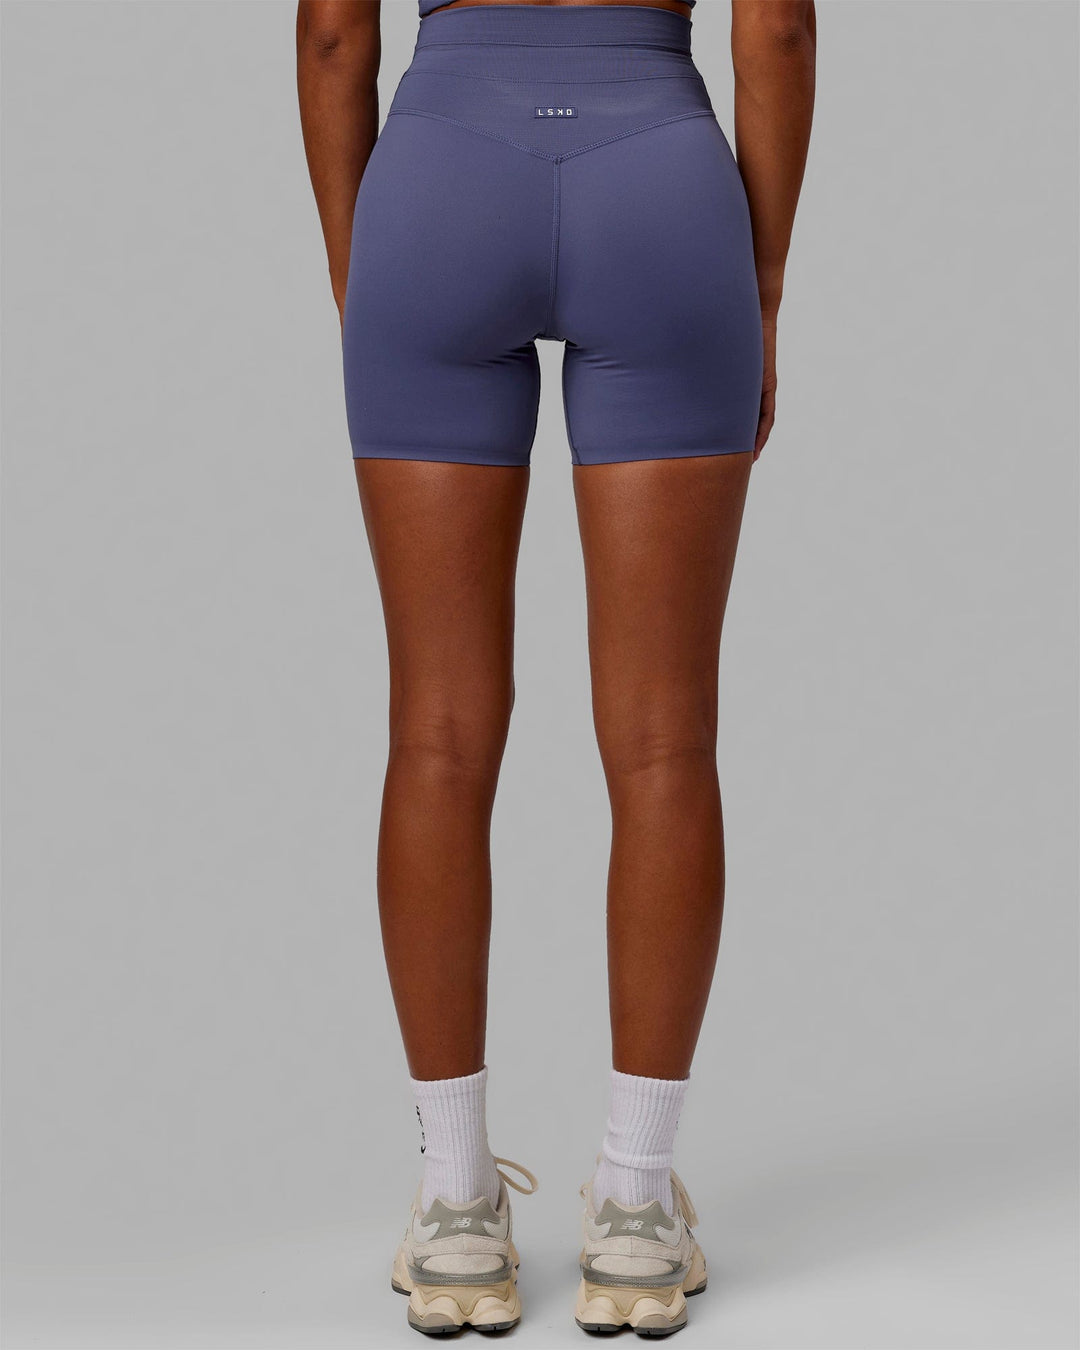 Woman wearing Resistance Mid Short Tights - Future Dusk